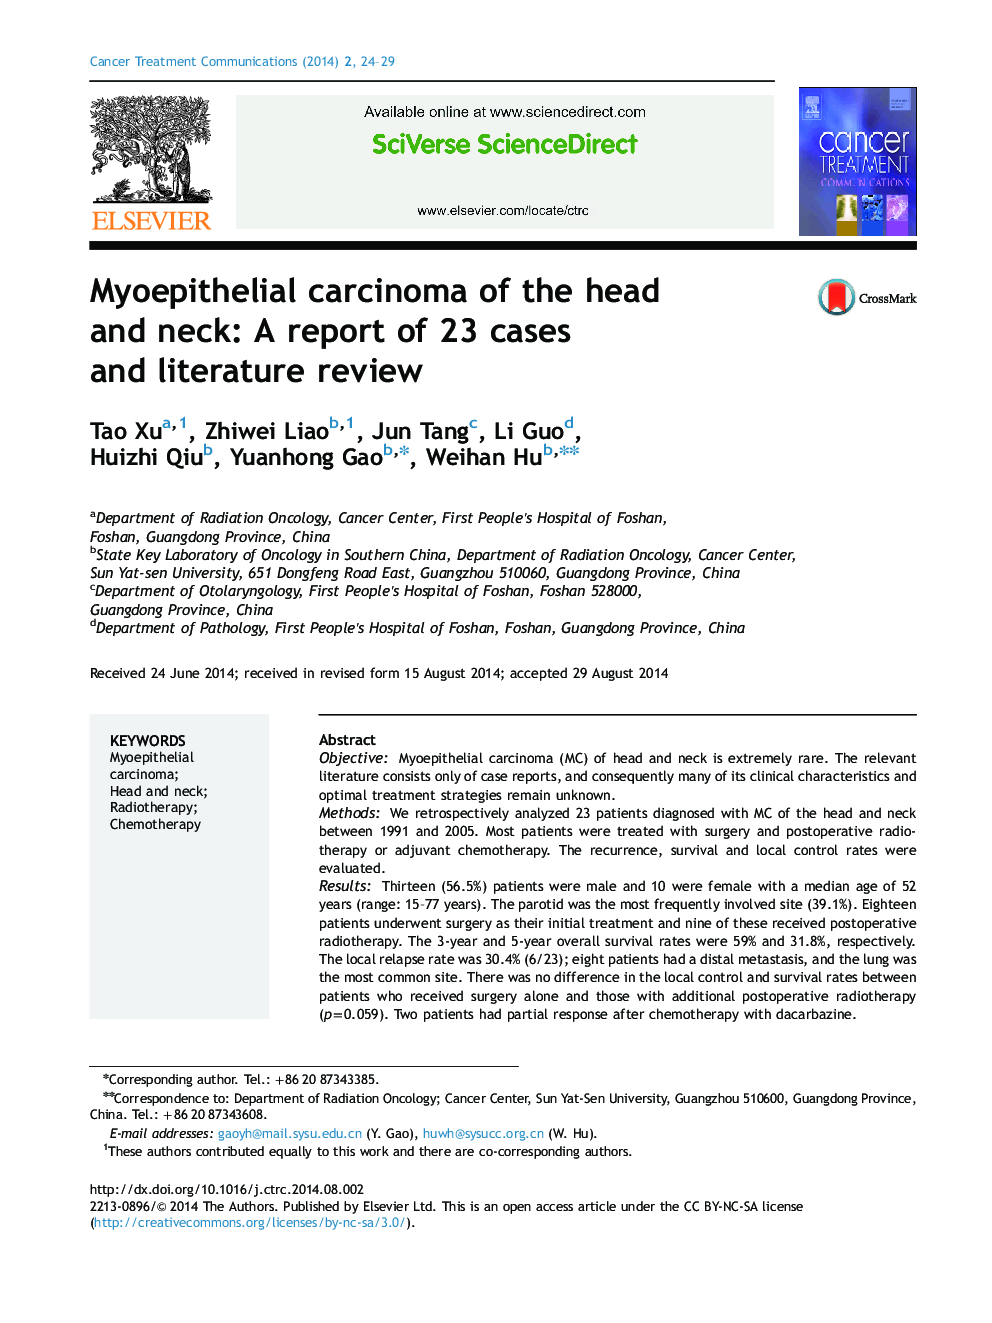 Myoepithelial carcinoma of the head and neck: A report of 23 cases and literature review